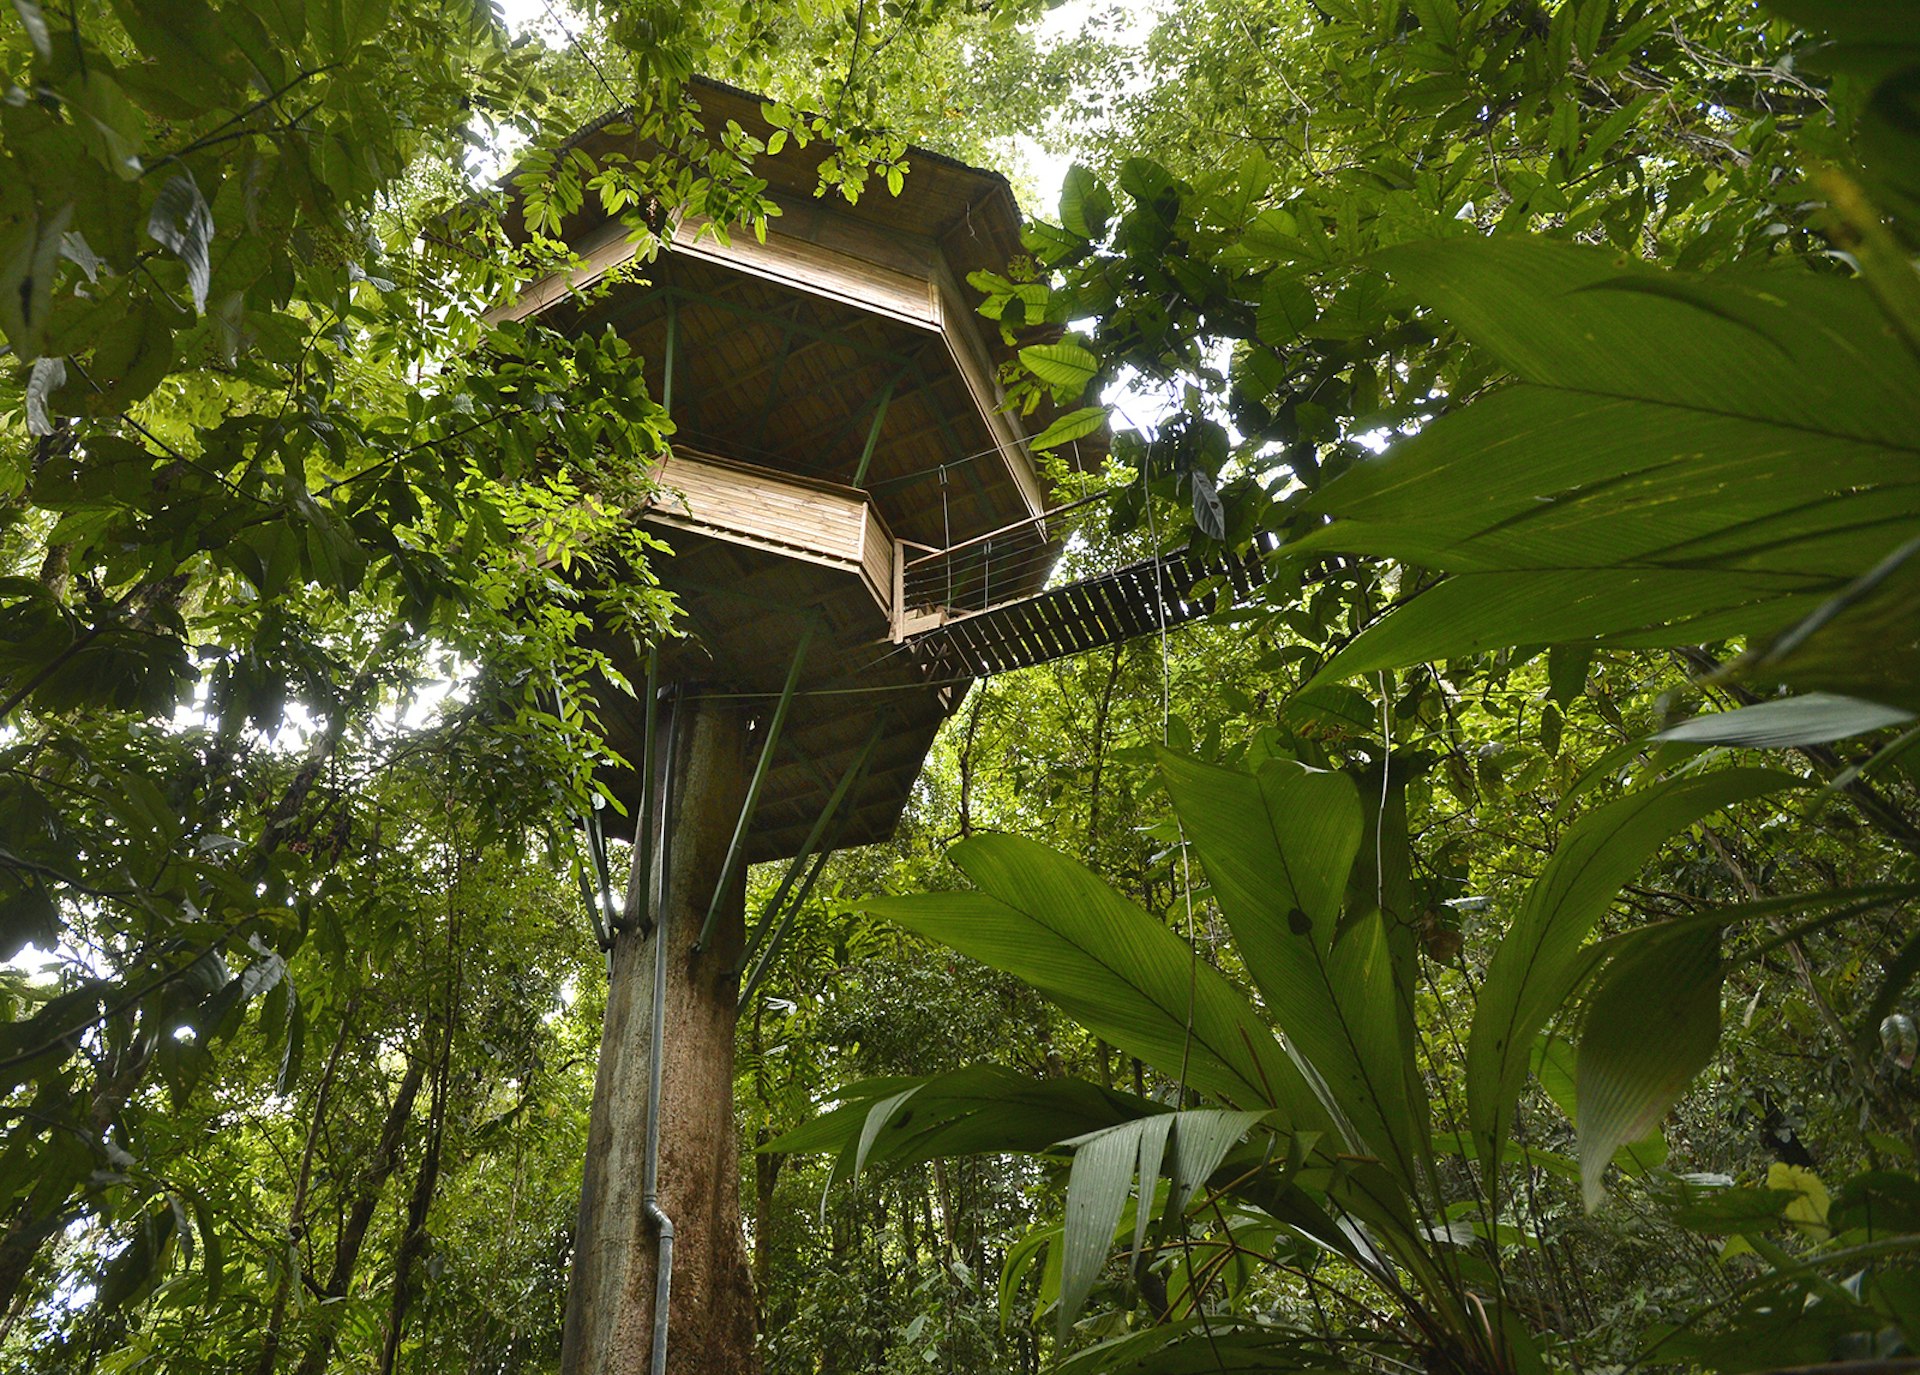 View of a tree house from the ground at Finca Bellavista, Costa Rica